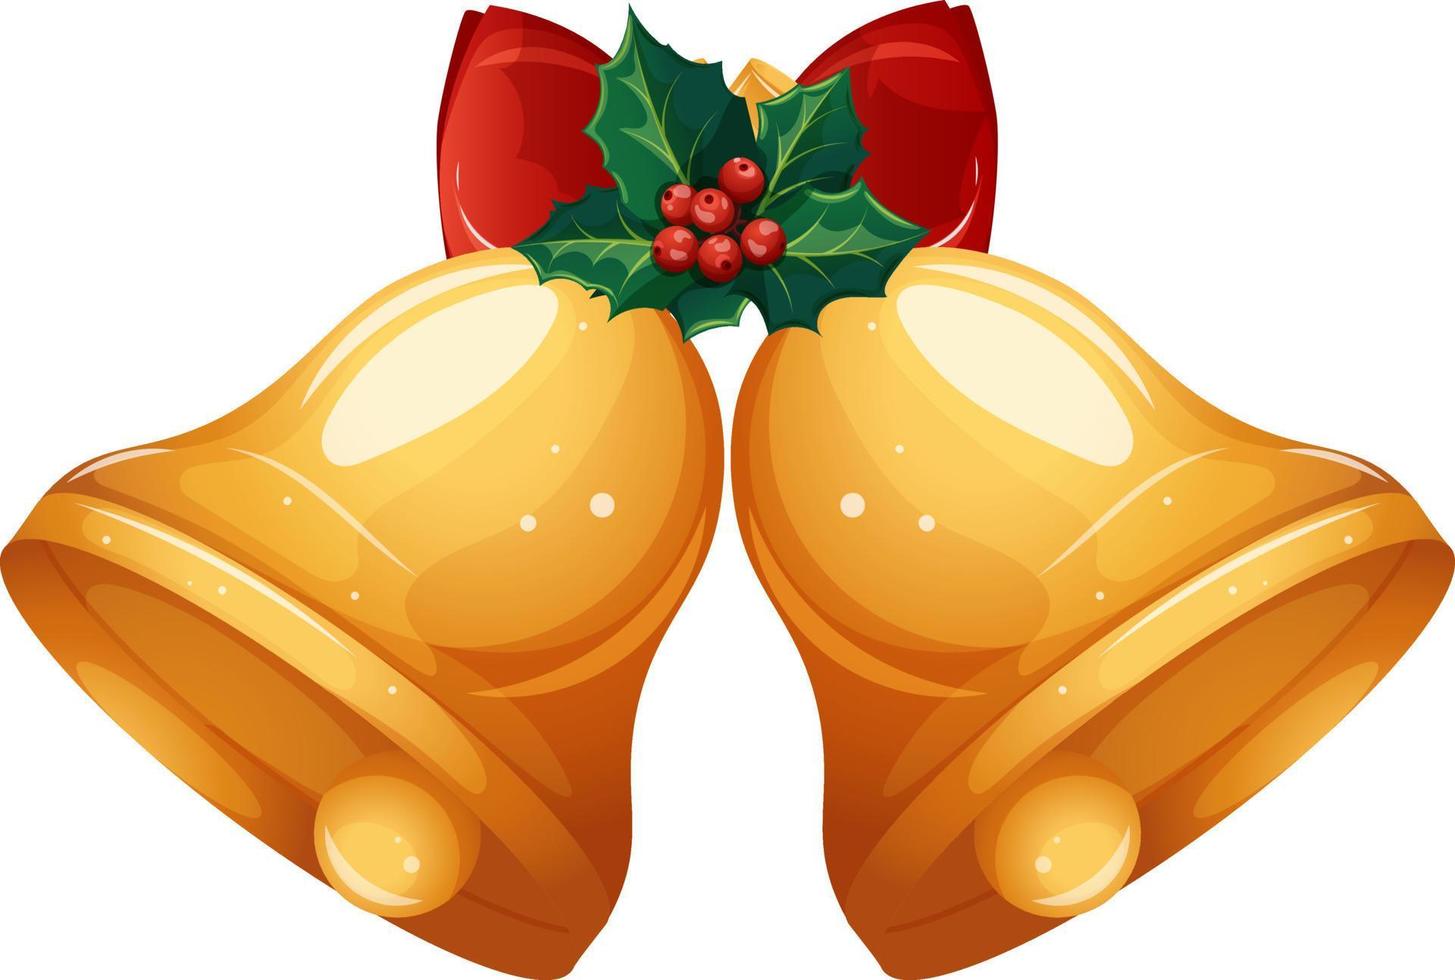 Two golden bells with a red bow and mistletoe, Christmas bells vector